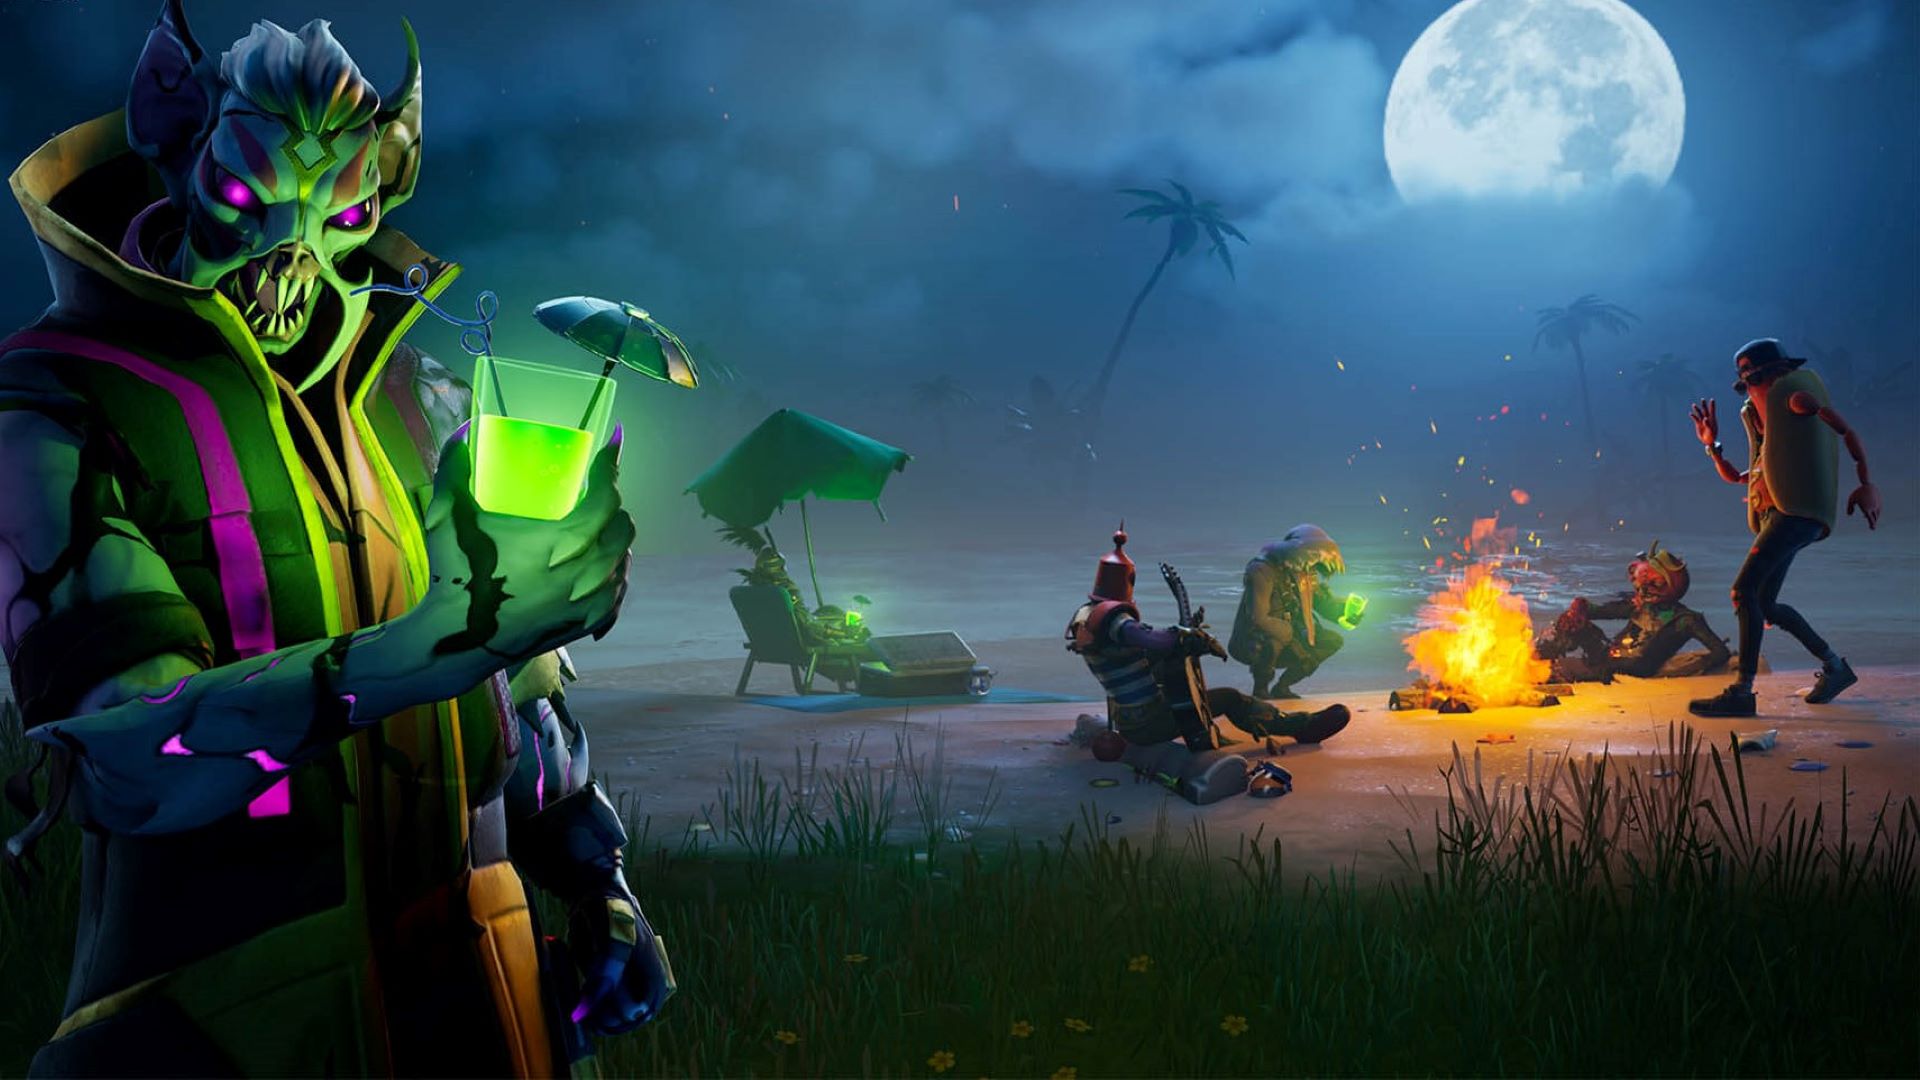 Fortnite Fortnitemares callout begins the countdown to Halloween